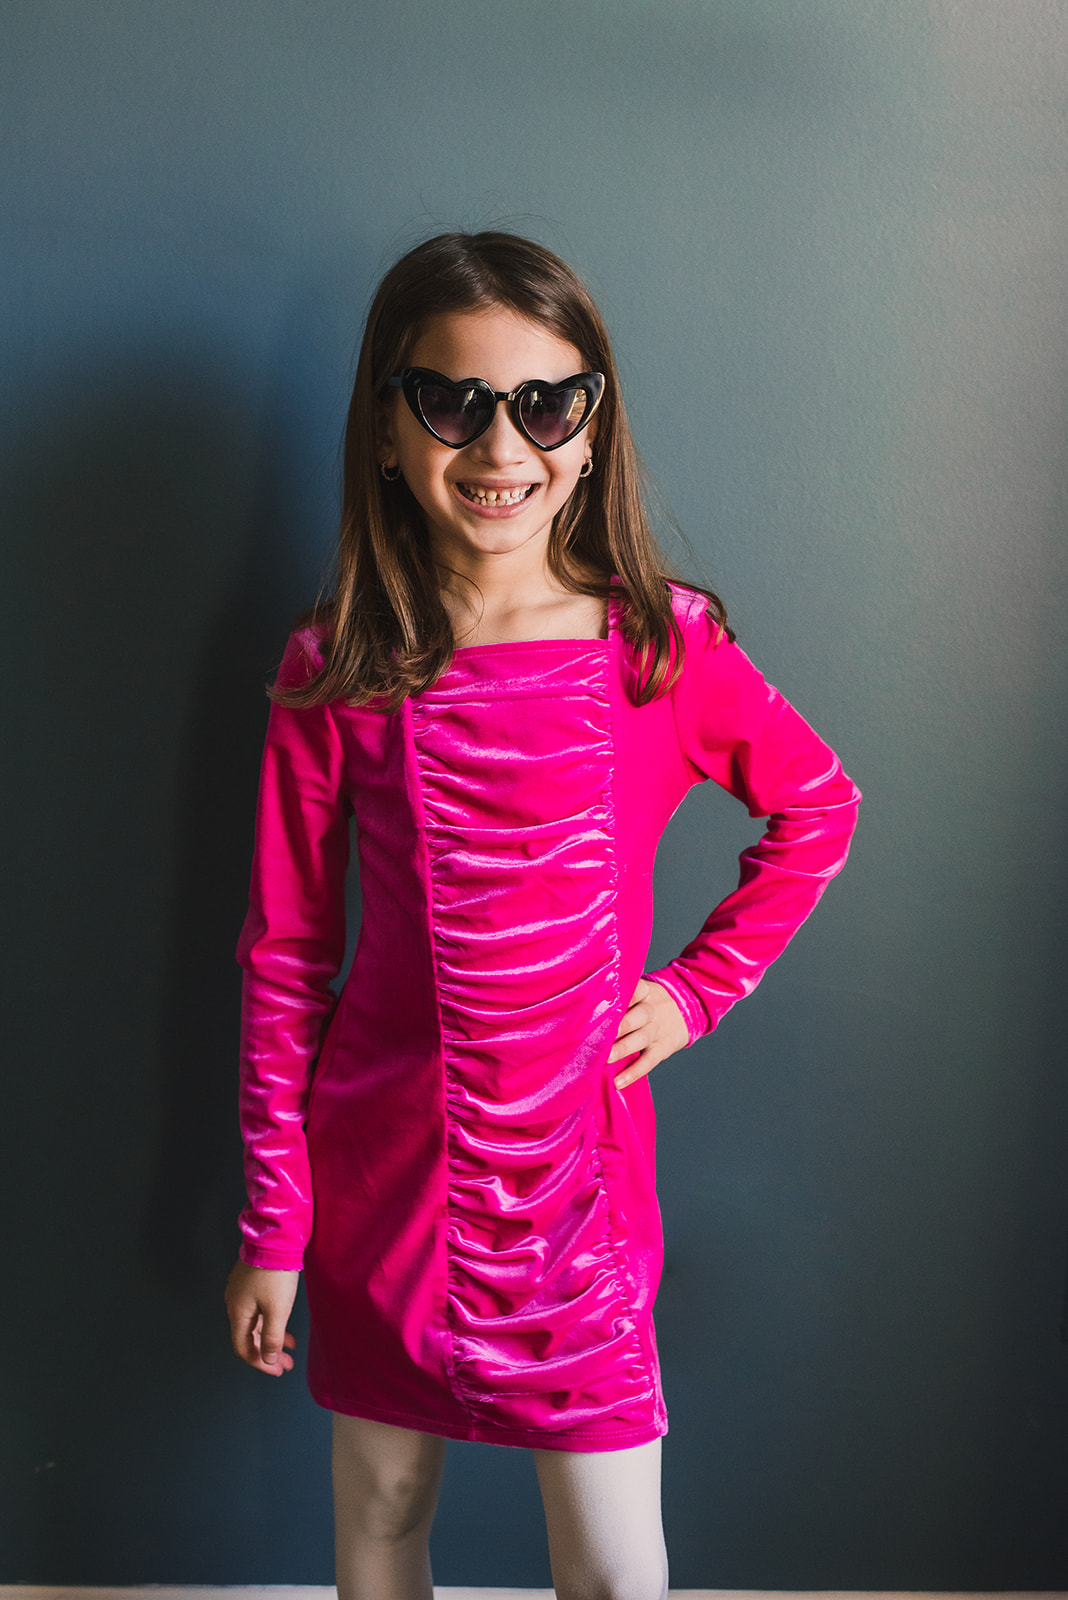 GIrl in pink dress and sunglasses